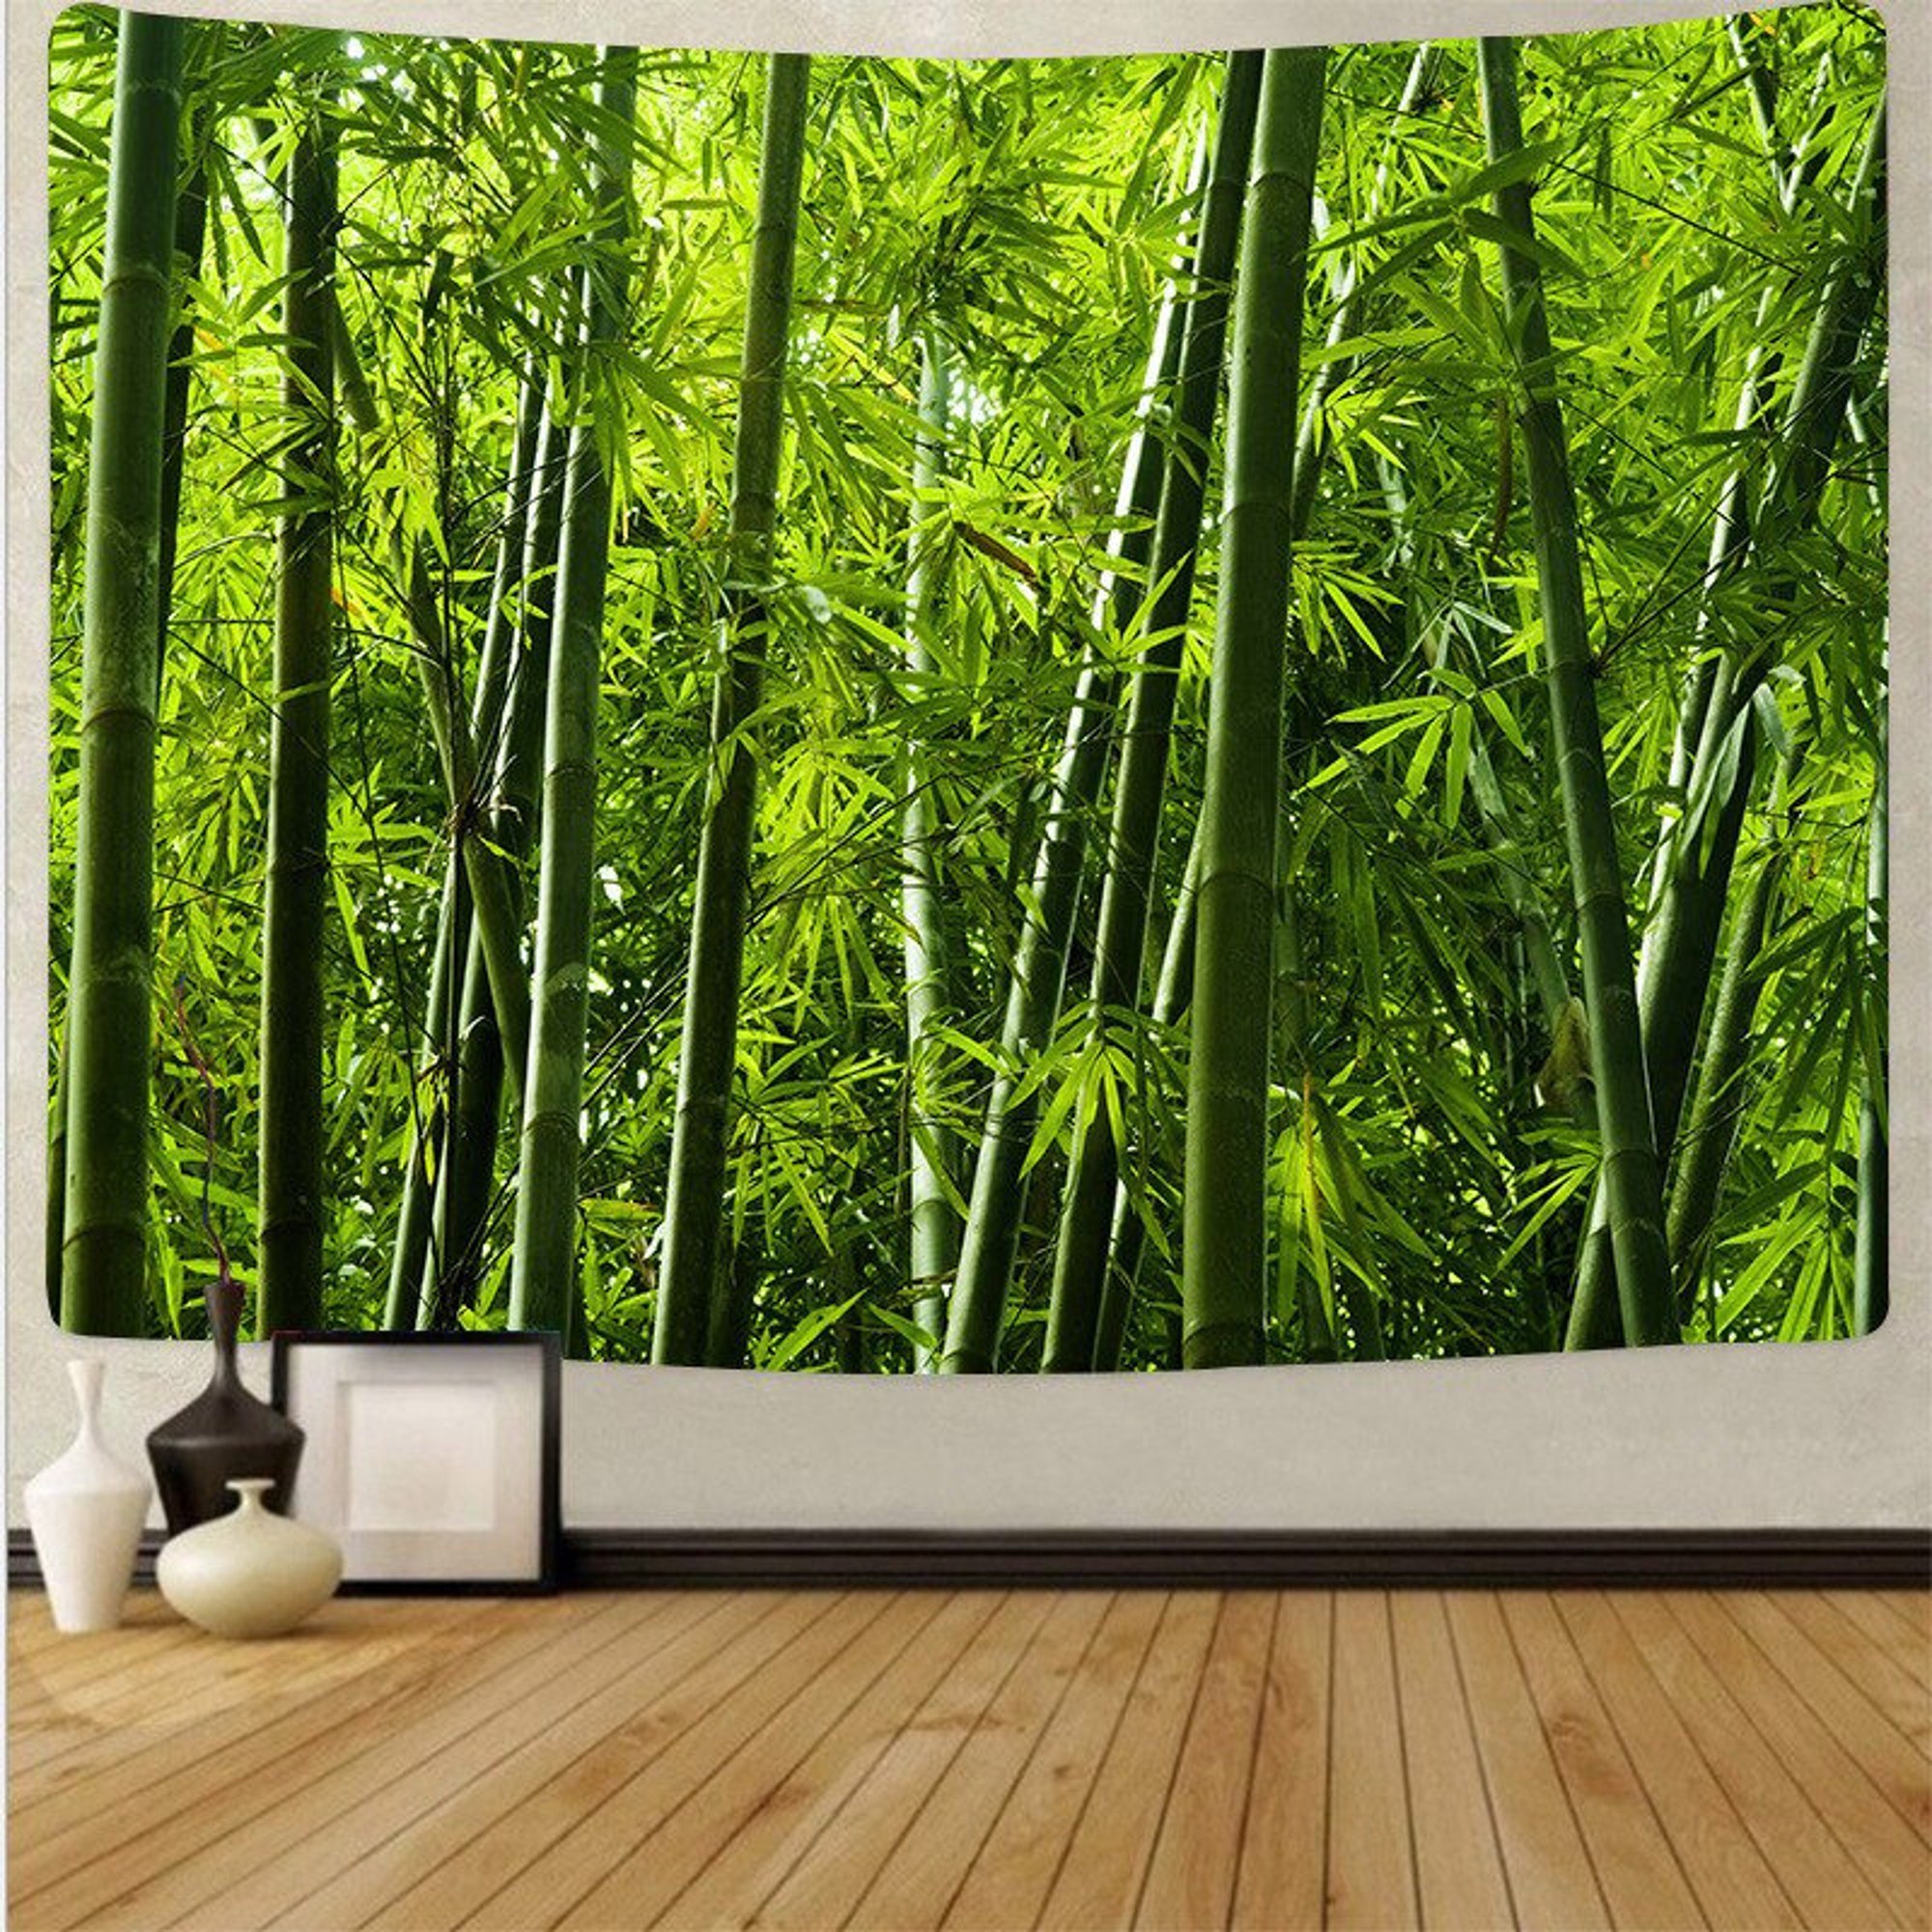 Bamboo Wall Tapestry Bamboo Forest Tapestry Wall Hanging Green Decor